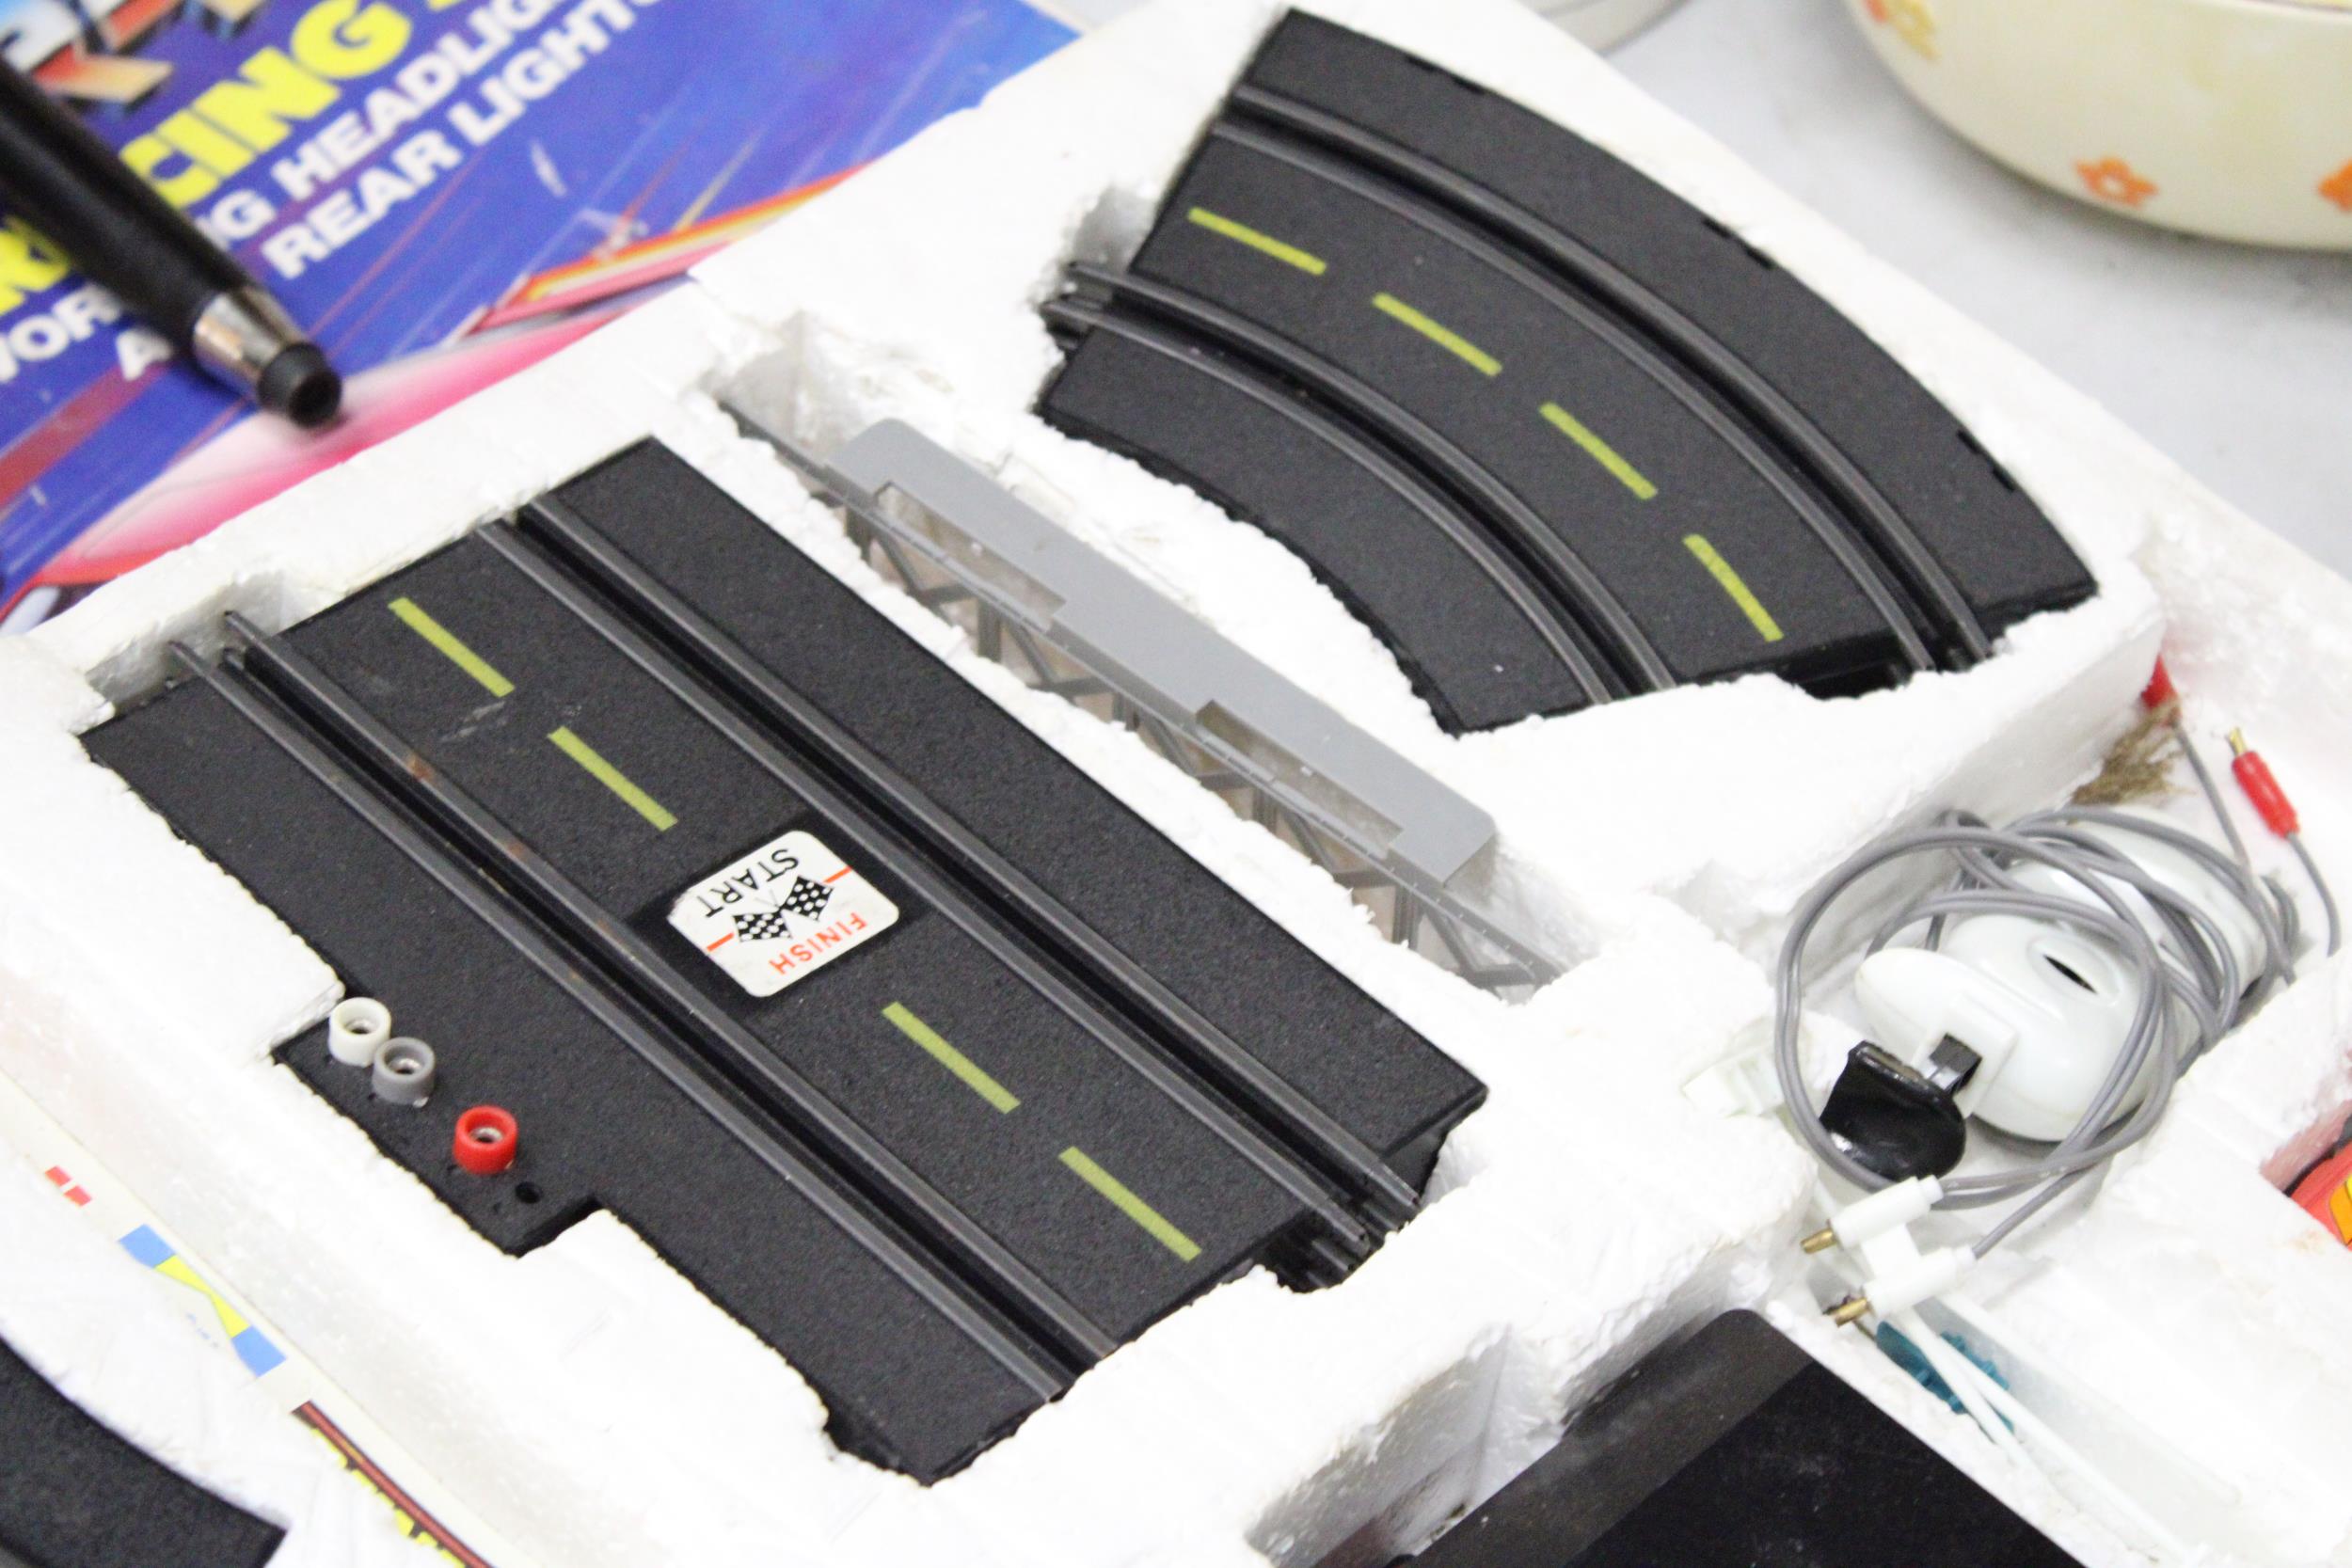 A SIERRA XR4i, RACING GAME WITH ILLUMINATED LIGHTS, BOXED, VENDOR STATES FULL SET, NO WARRANTY GIVEN - Image 6 of 6